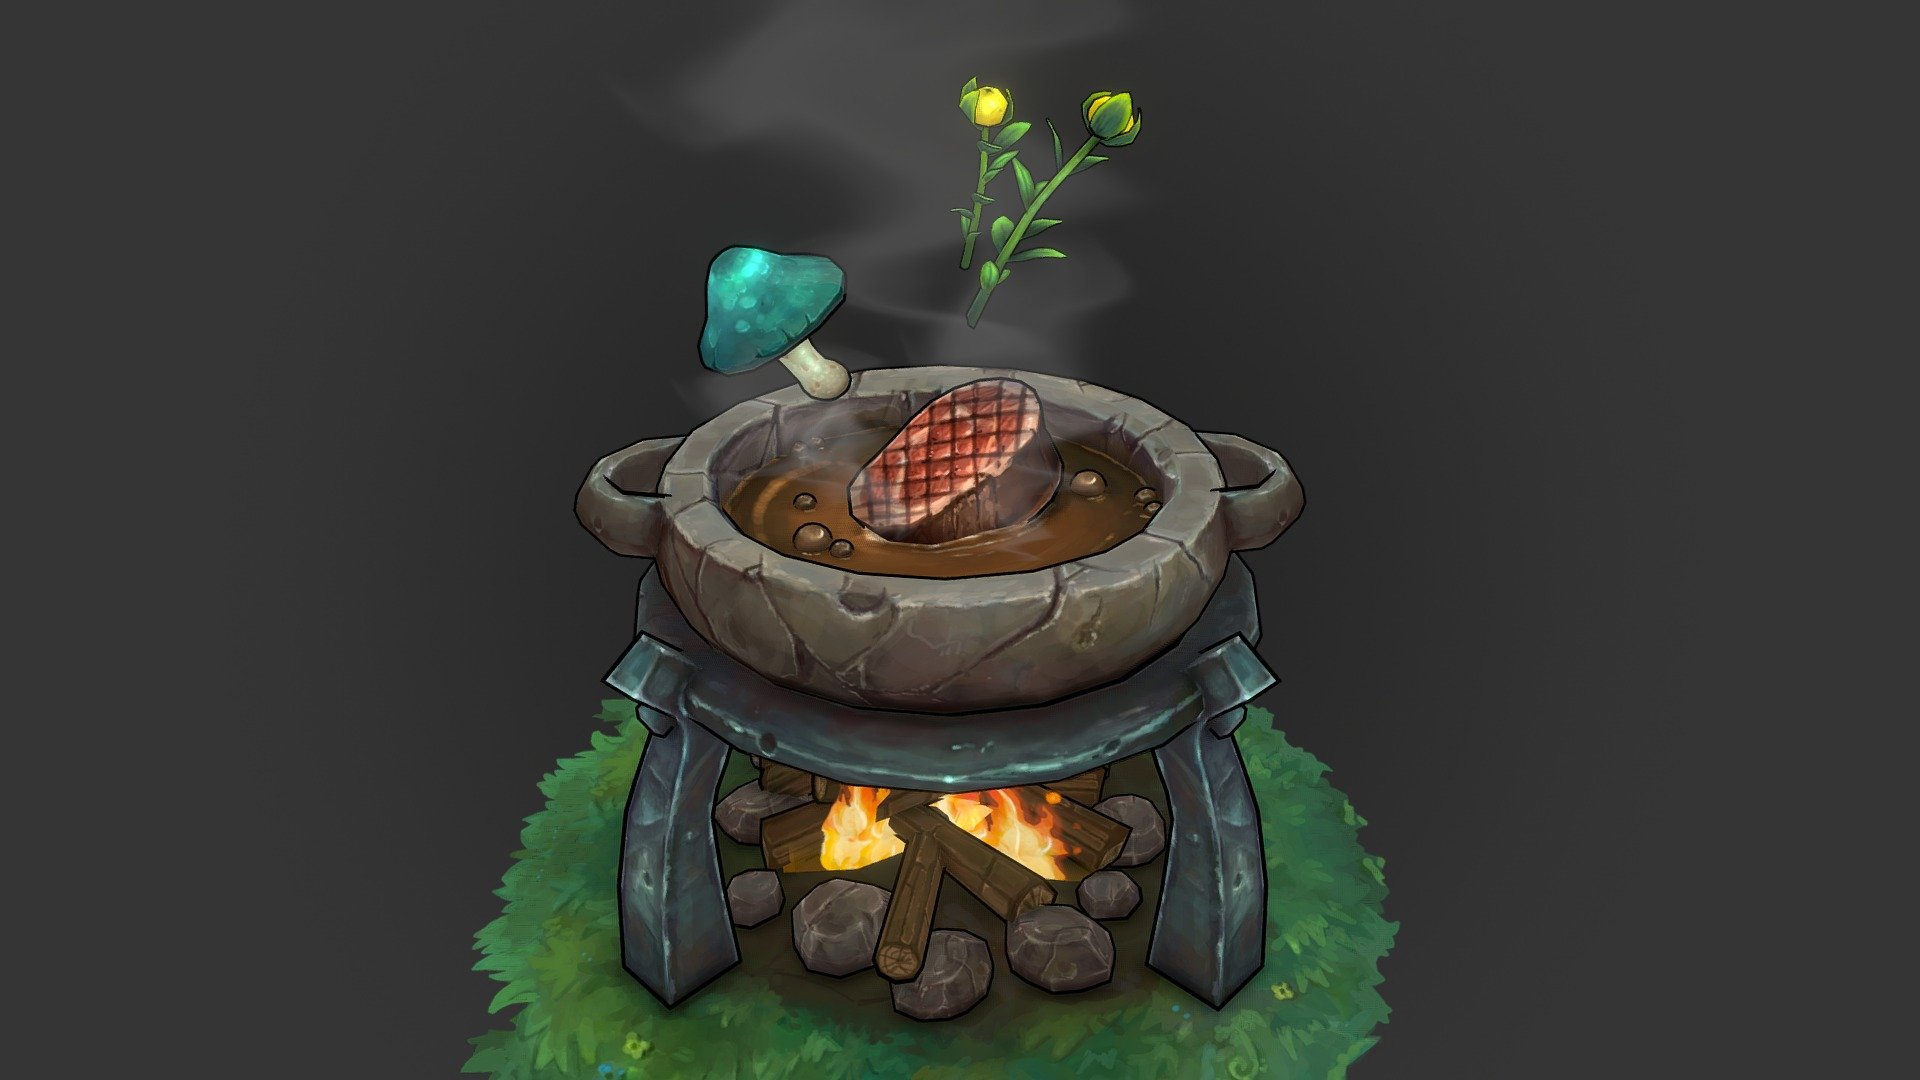 A little side project I've been working on to practise different materials and convert something existing into my handpainted style! This is the Breath of the Wild cooking pot with the ingredients to cook up a nice stew! Had a lot of fun with the different materials in this!
All diffuse handpainted 3d model